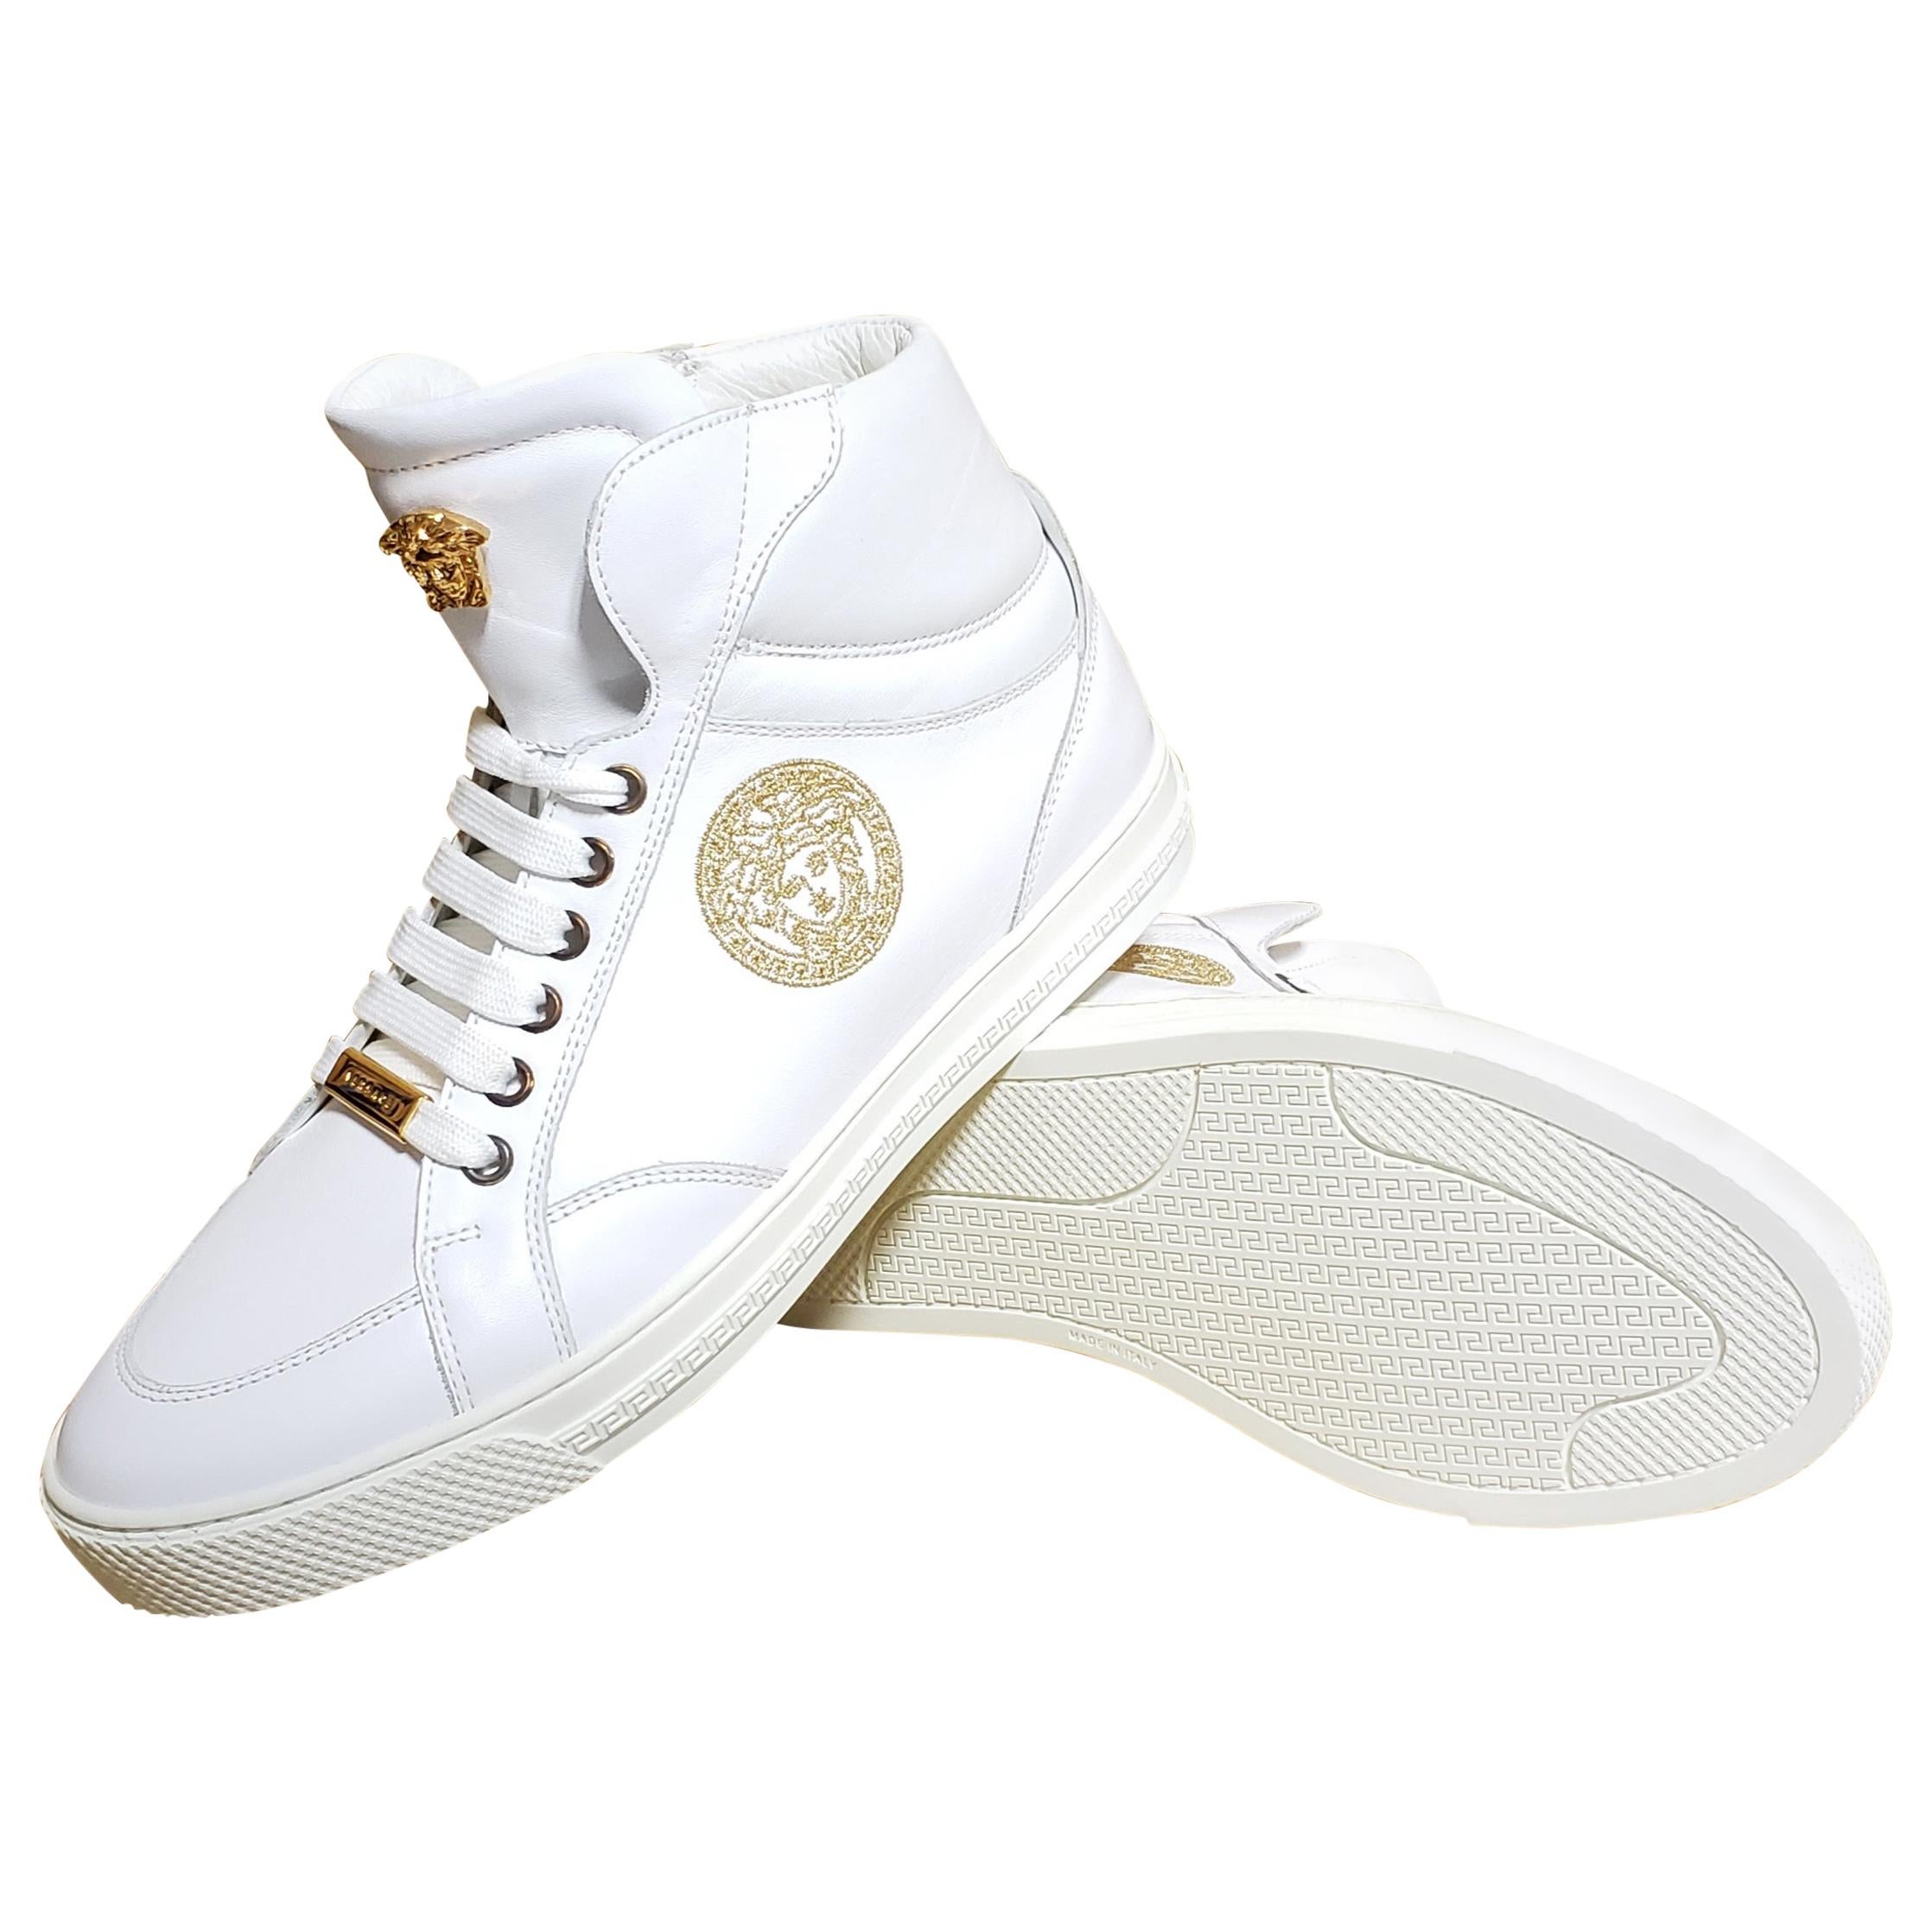 NEW VERSACE WHITE LEATHER SNEAKERS w/EMBROIDERED GOLD MEDUSA 39.5 - 6.5